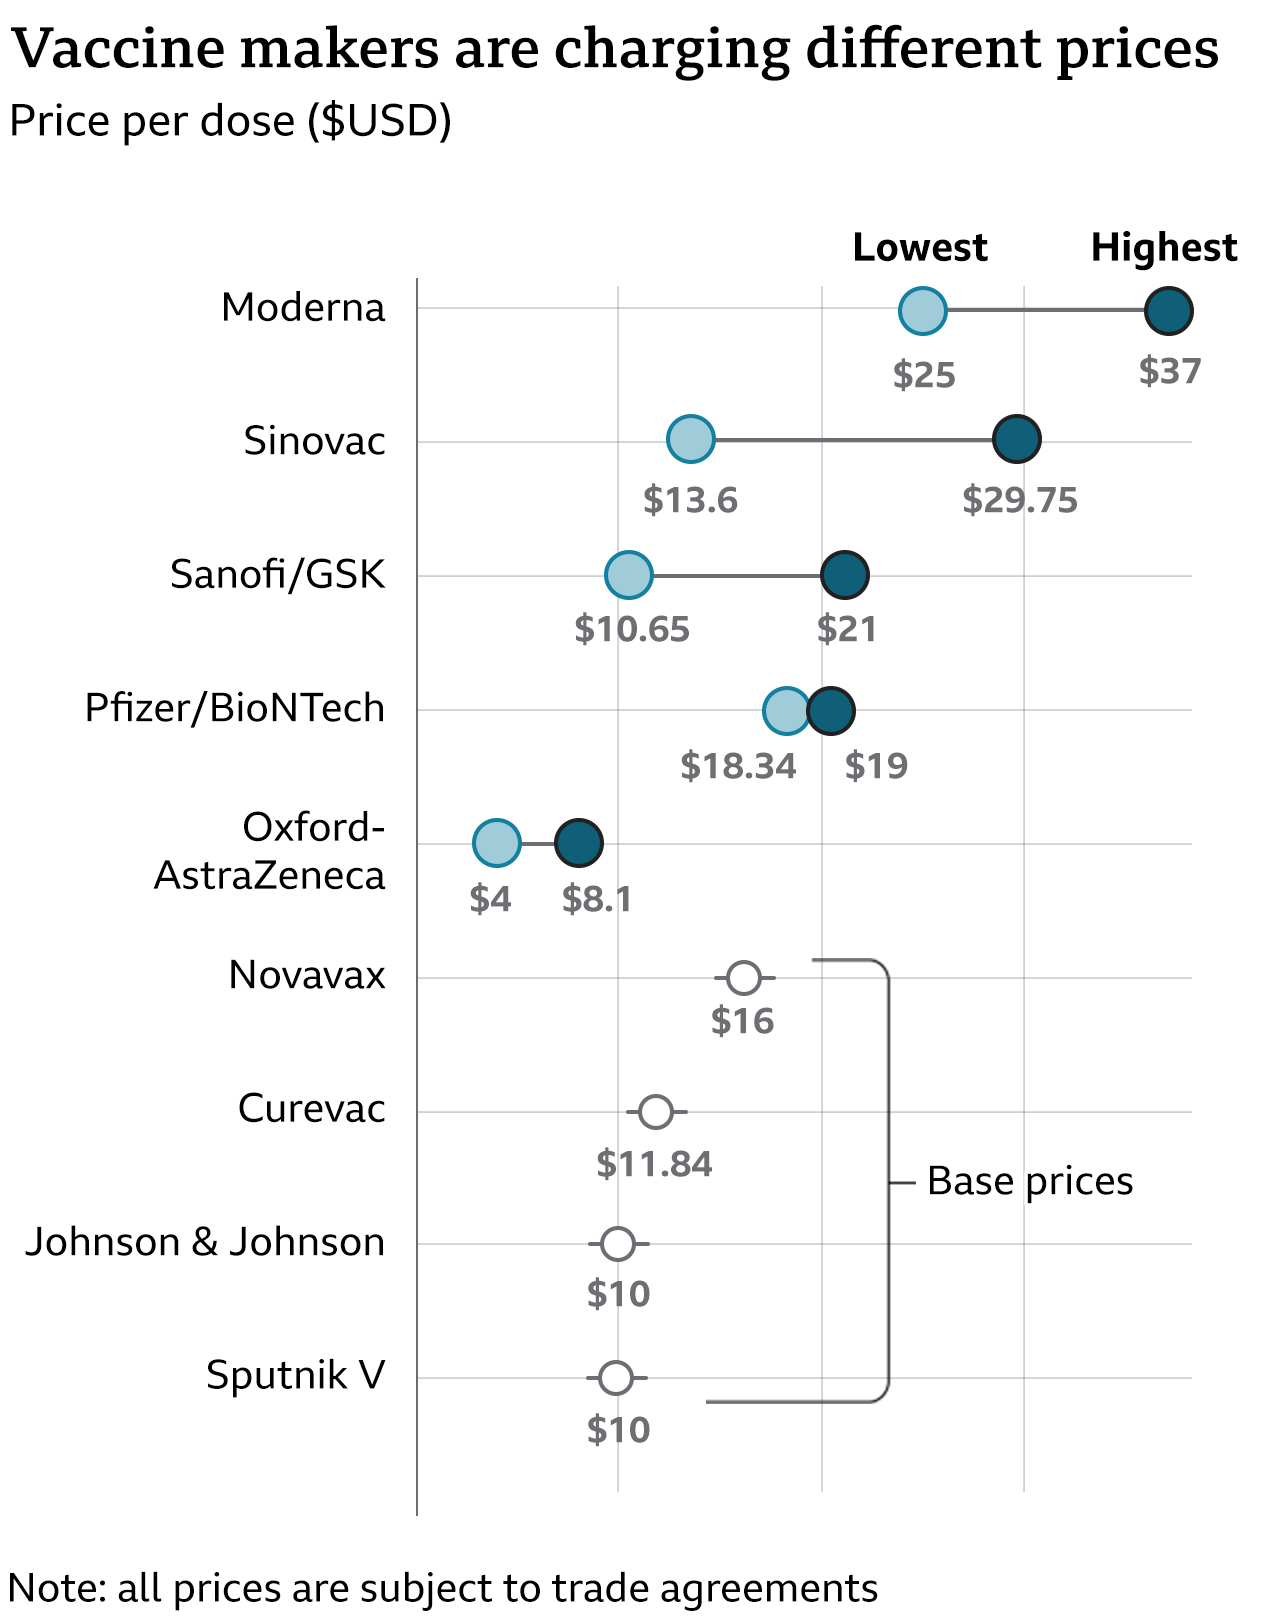 Cost of Vaccine Doses set by Vaccine Companies